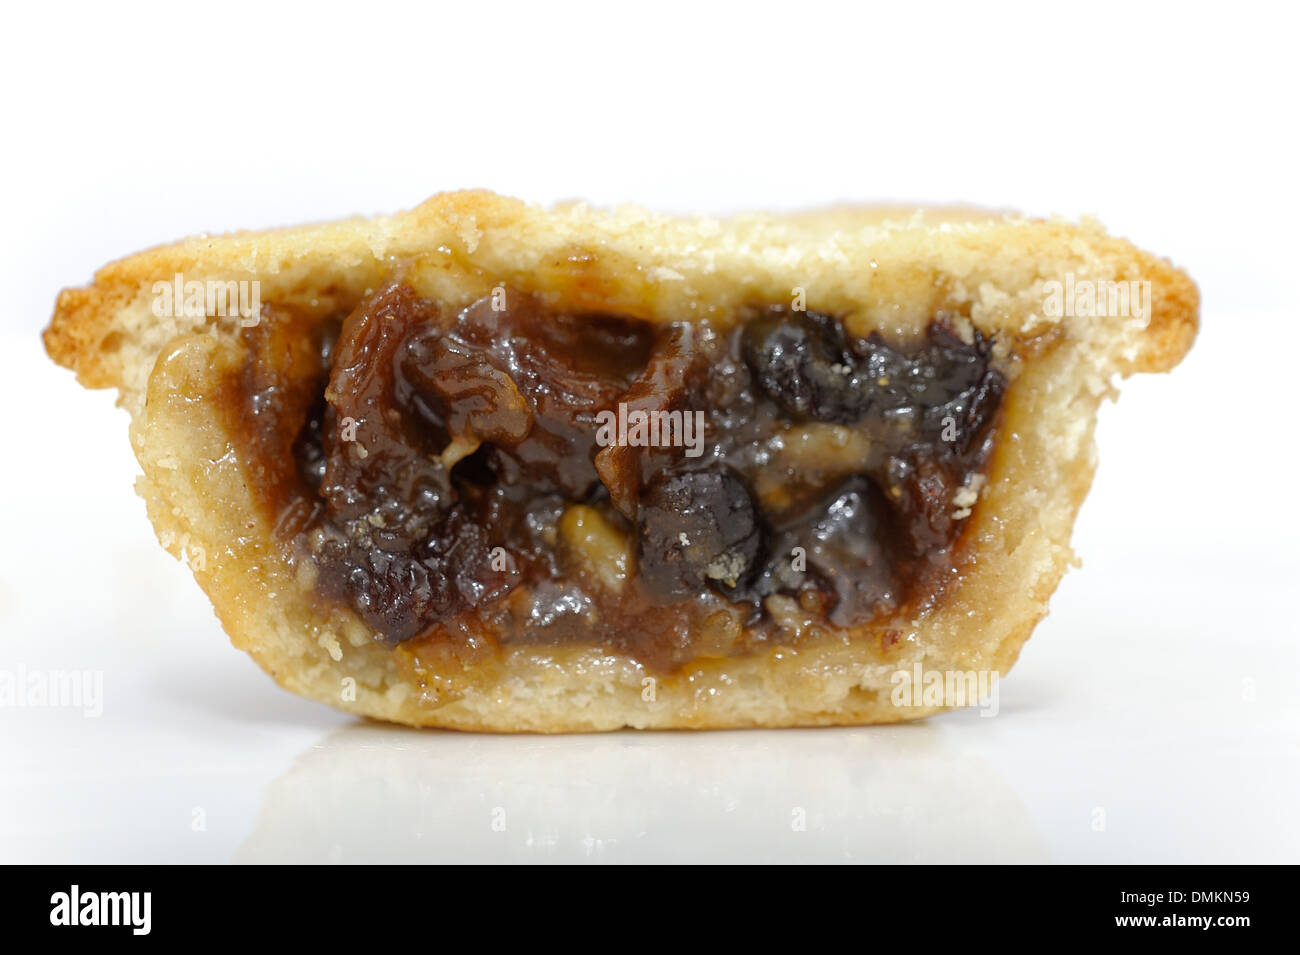 A festive Christmas mince pie cut in half to show the generous filling inside. Stock Photo